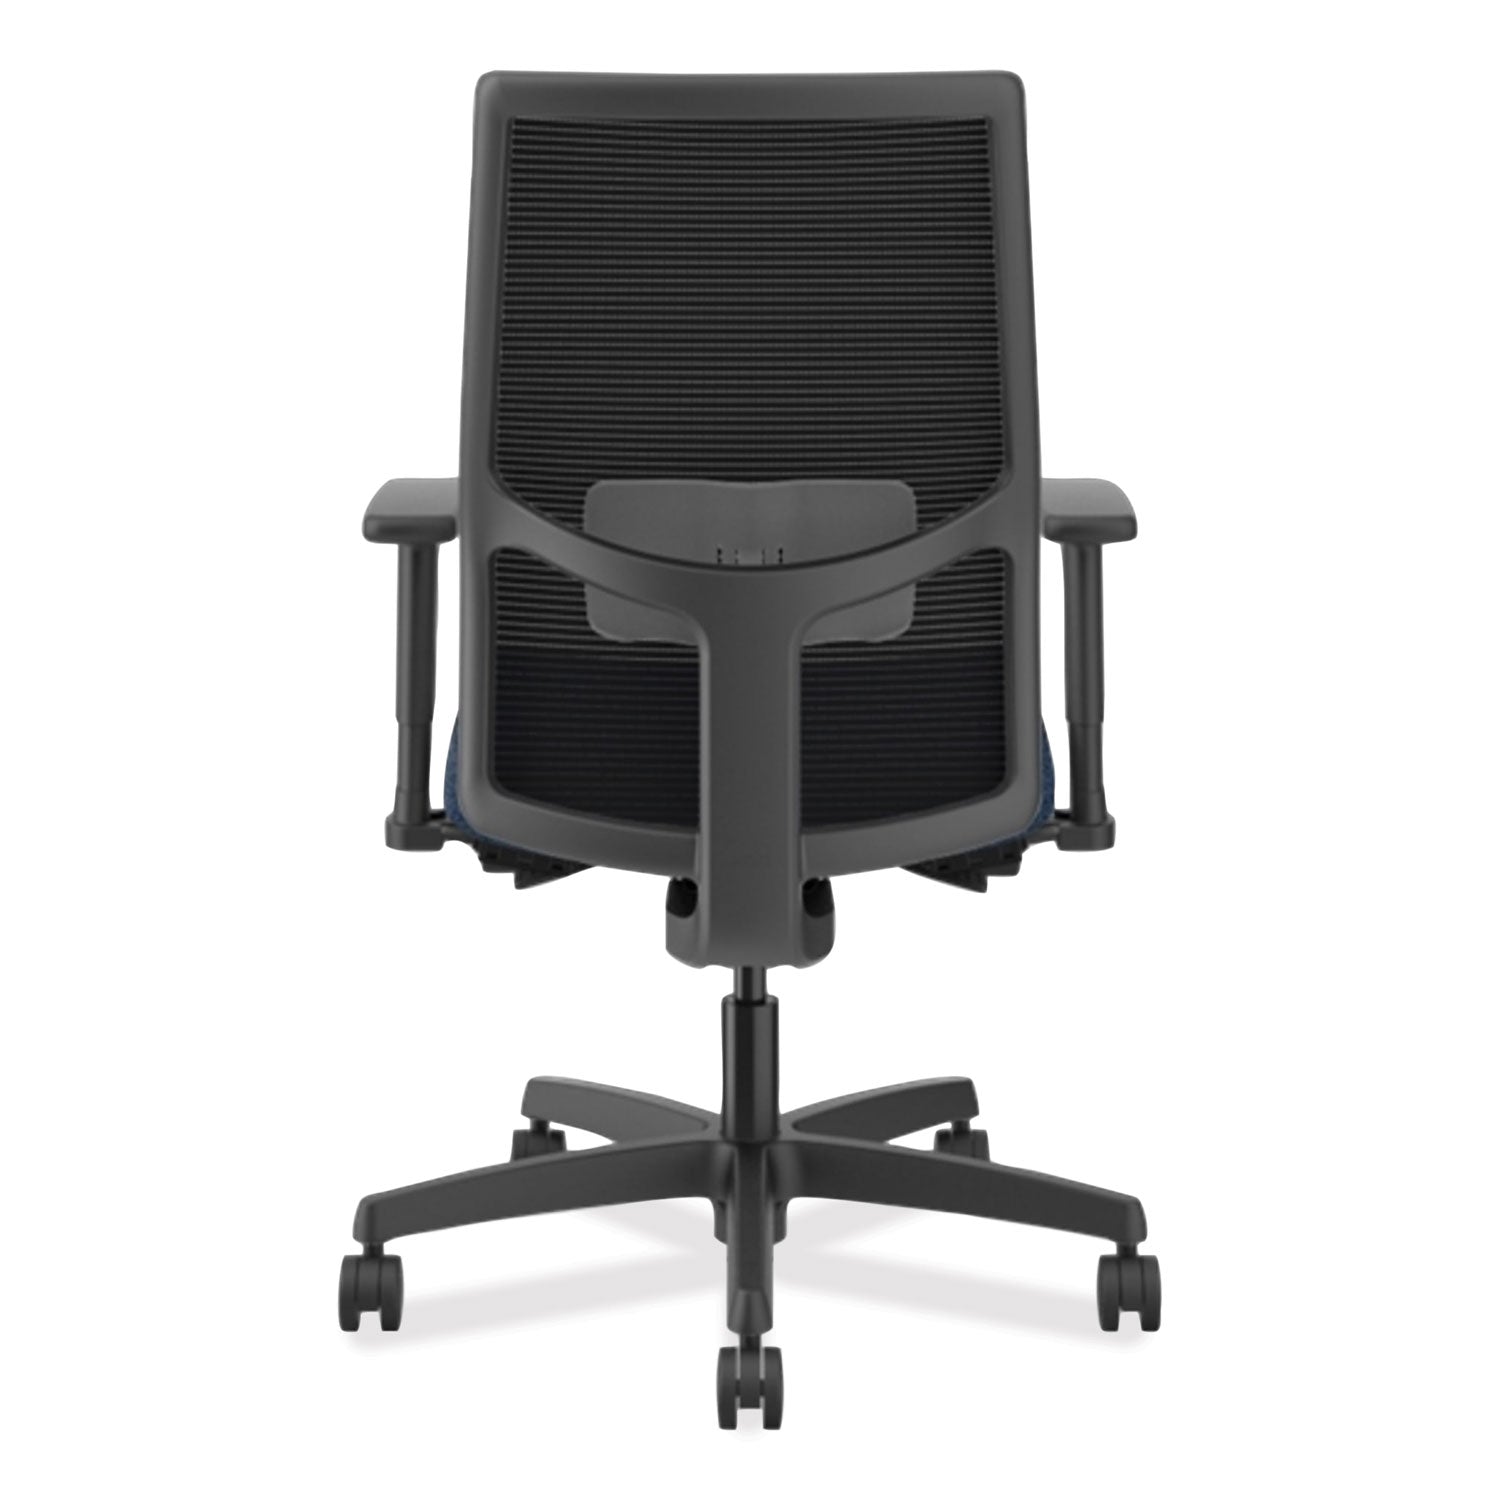 ignition-20-4-way-stretch-mid-black-mesh-task-chair-supports-300-lb-17-to-21-seat-ht-navy-black-ships-in-7-10-bus-days_honi2m2bmla13tk - 4